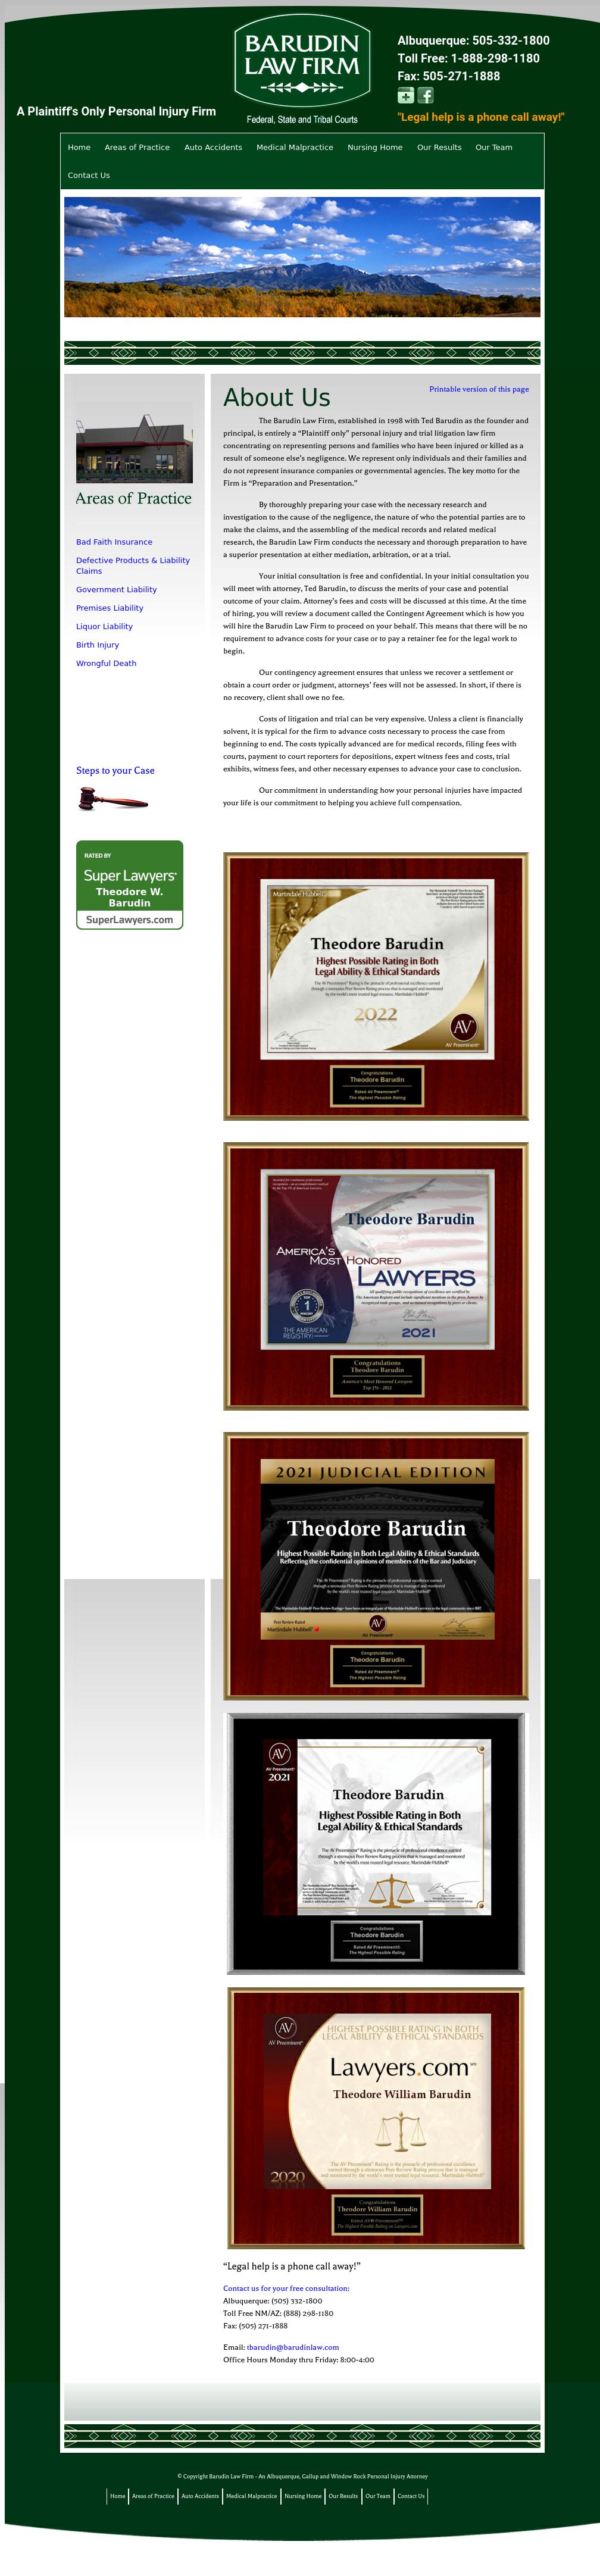 Barudin Law Firm PC - Albuquerque NM Lawyers